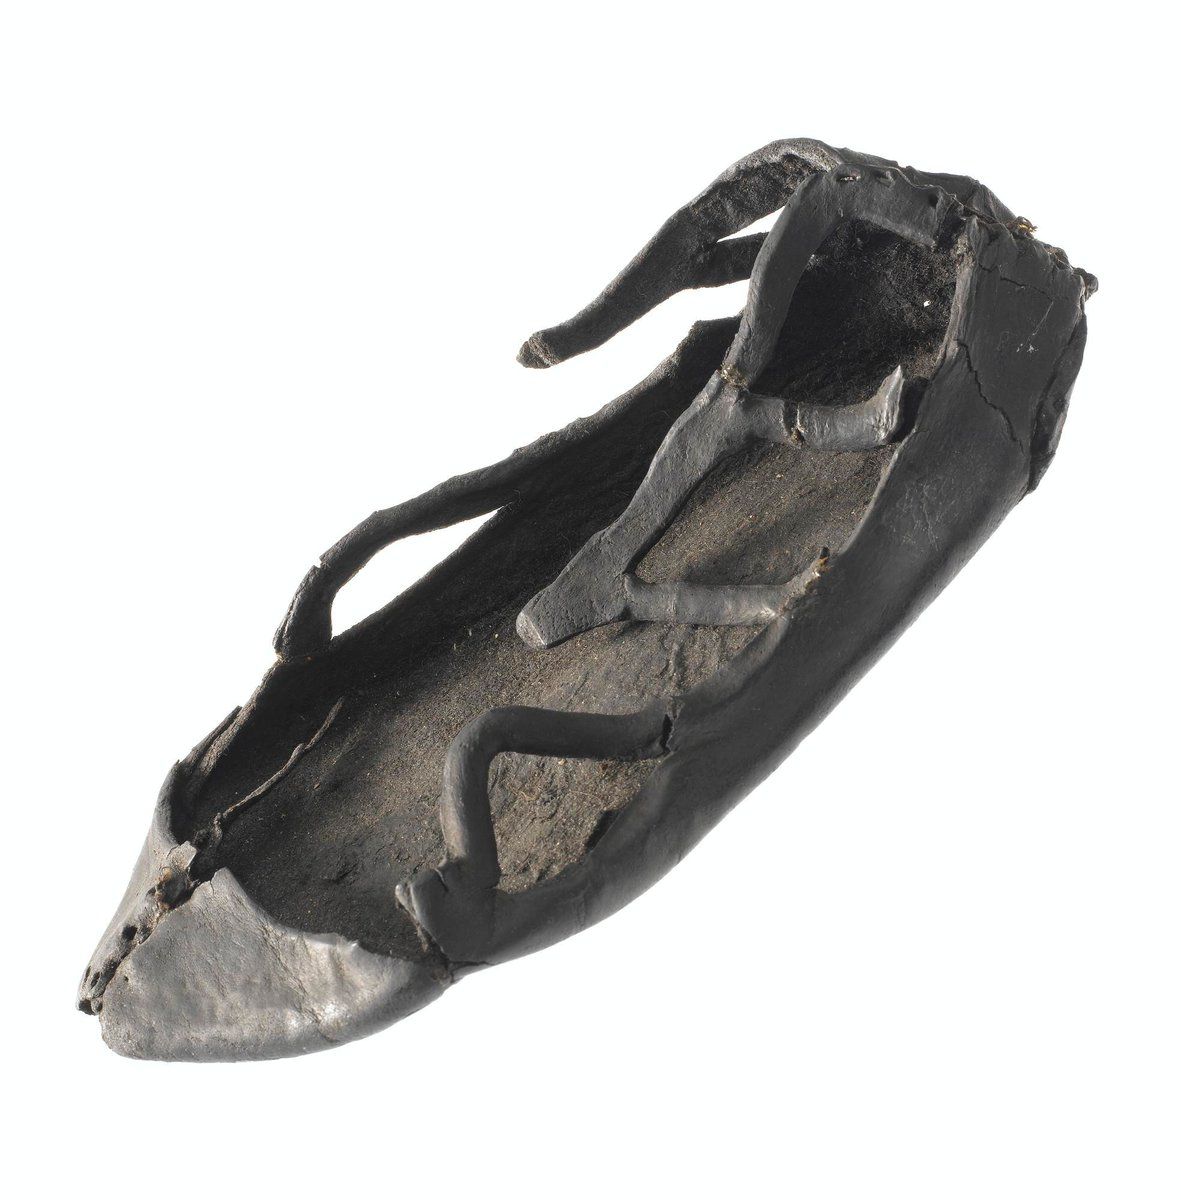 The sandal of a #Roman child from #Trimontium - @NtlMuseumsScot collection. 3,000 people, including women & children, lived at Trimontium. To find out more about children in Roman Britain, see this short film, presented by @bettanyhughes - zcu.io/znsV